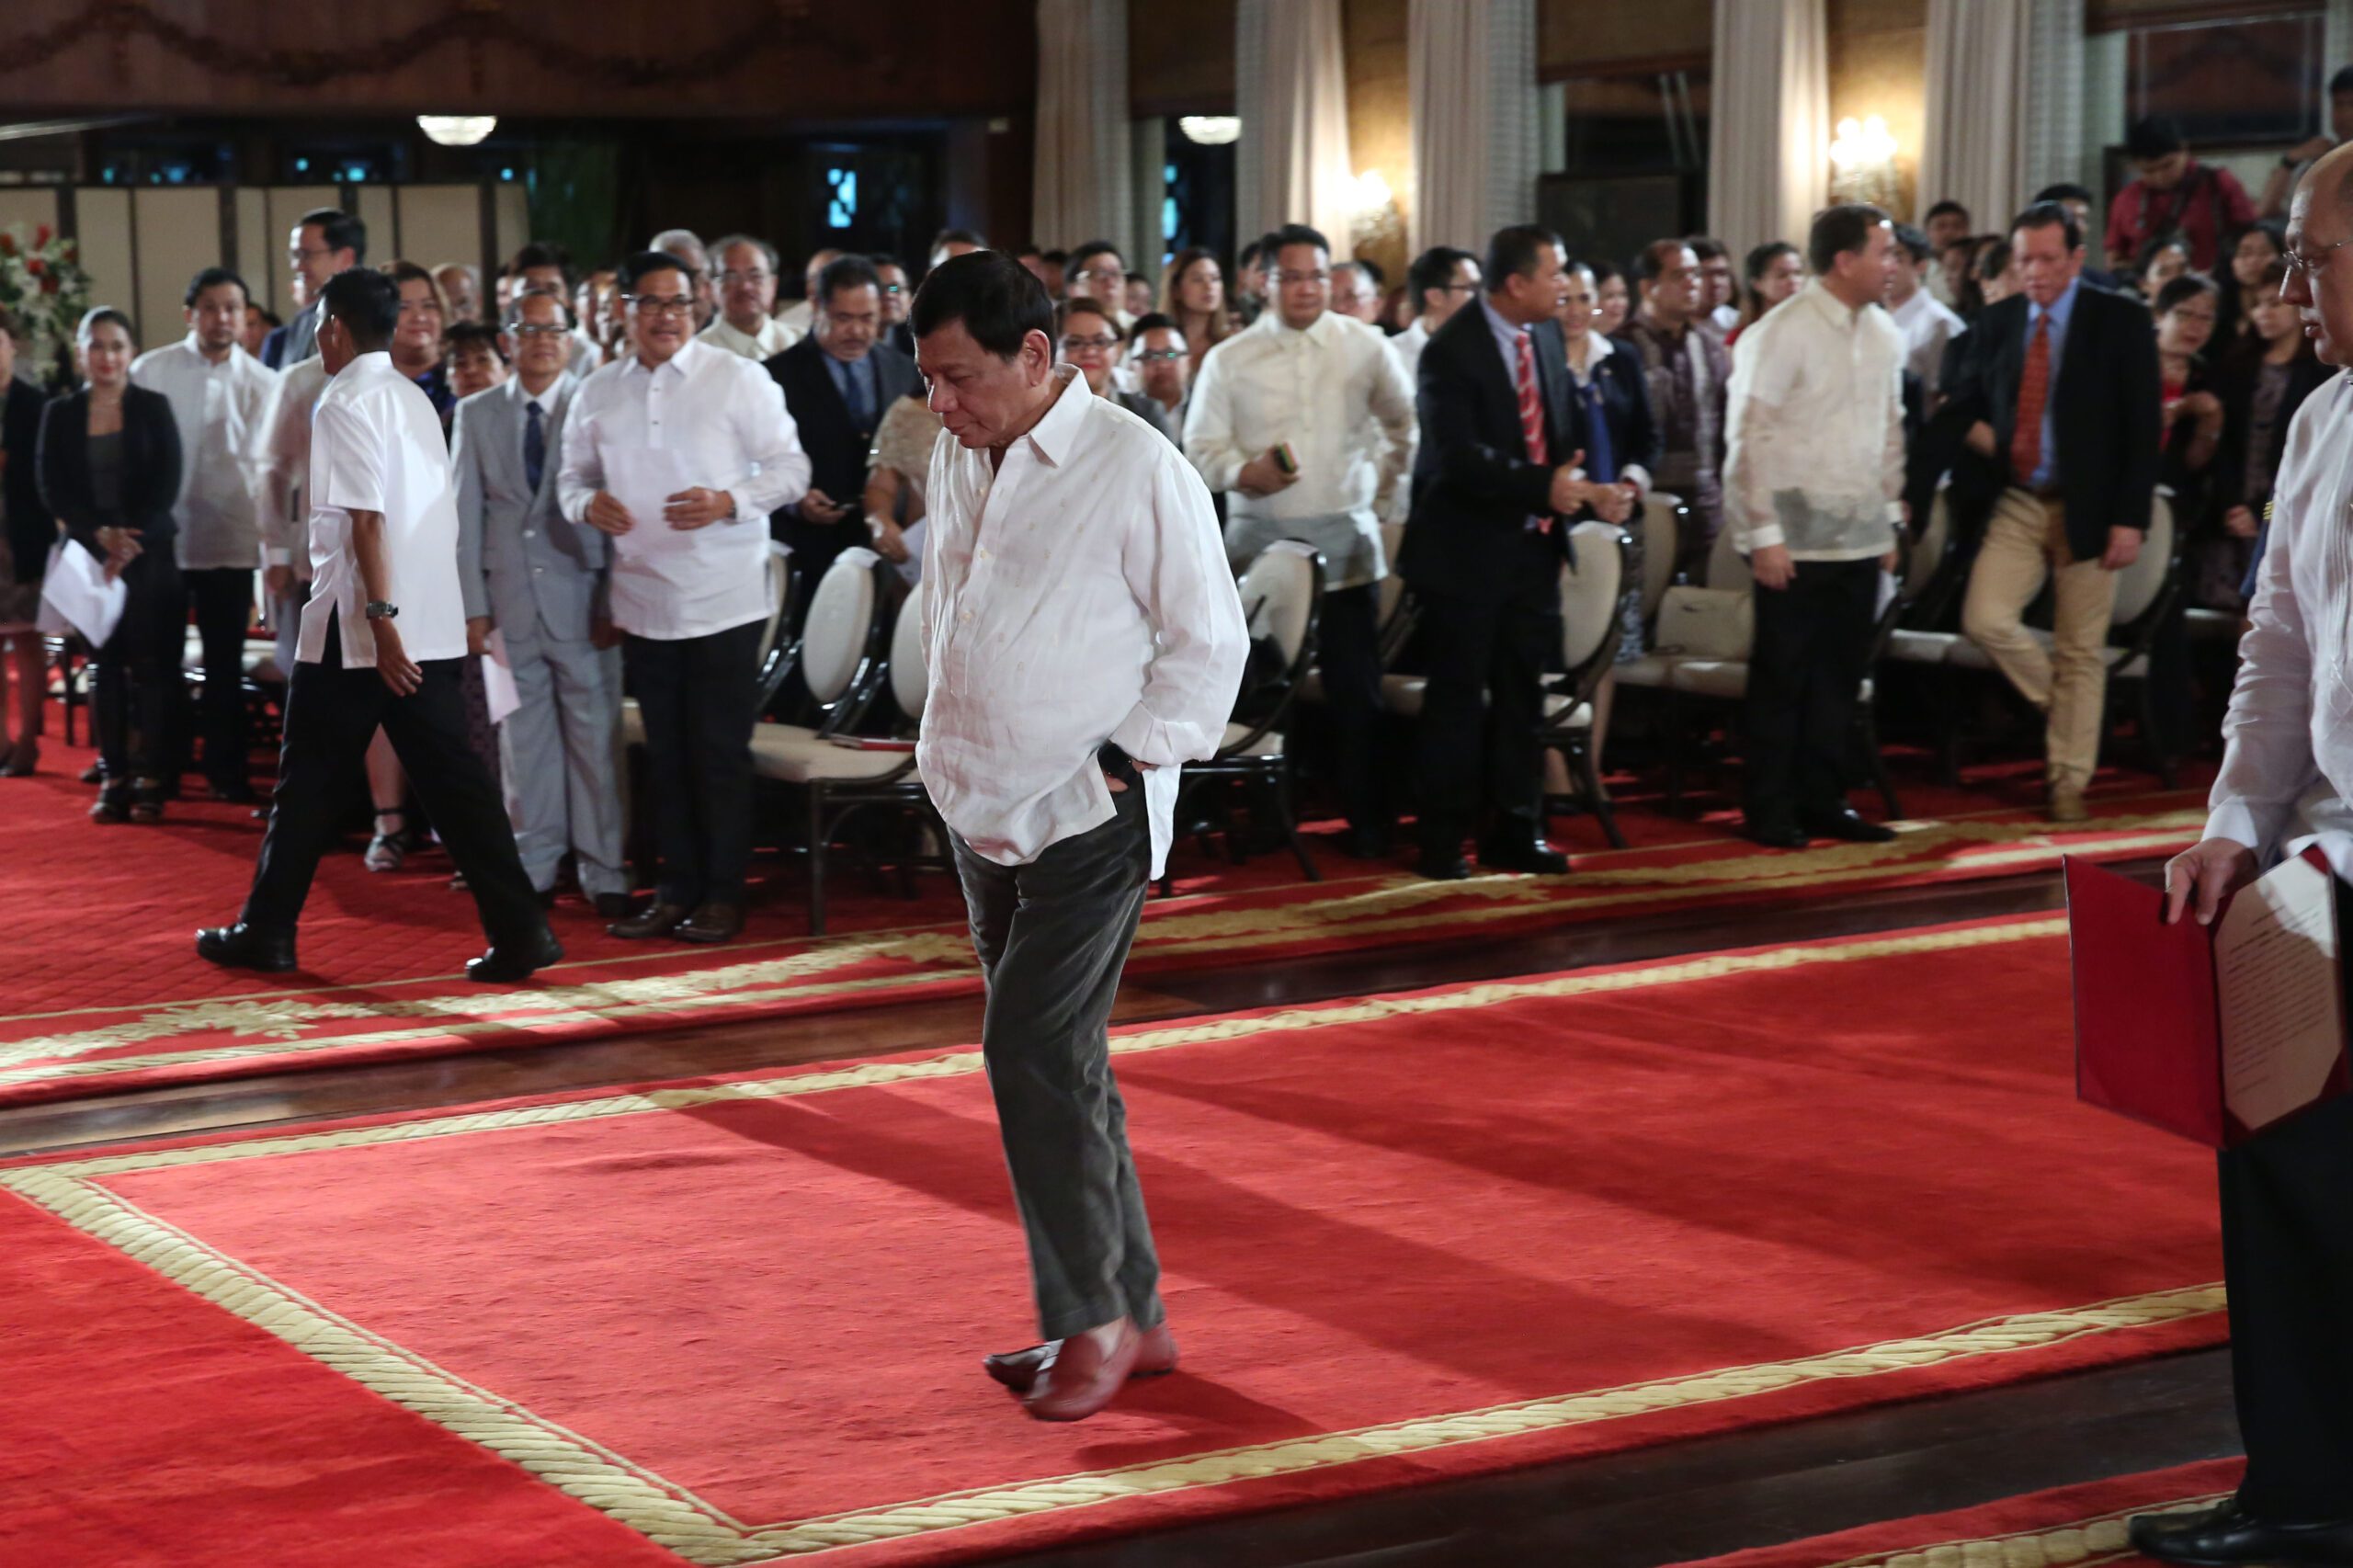 Duterte’s first foreign trip likely to an ASEAN country